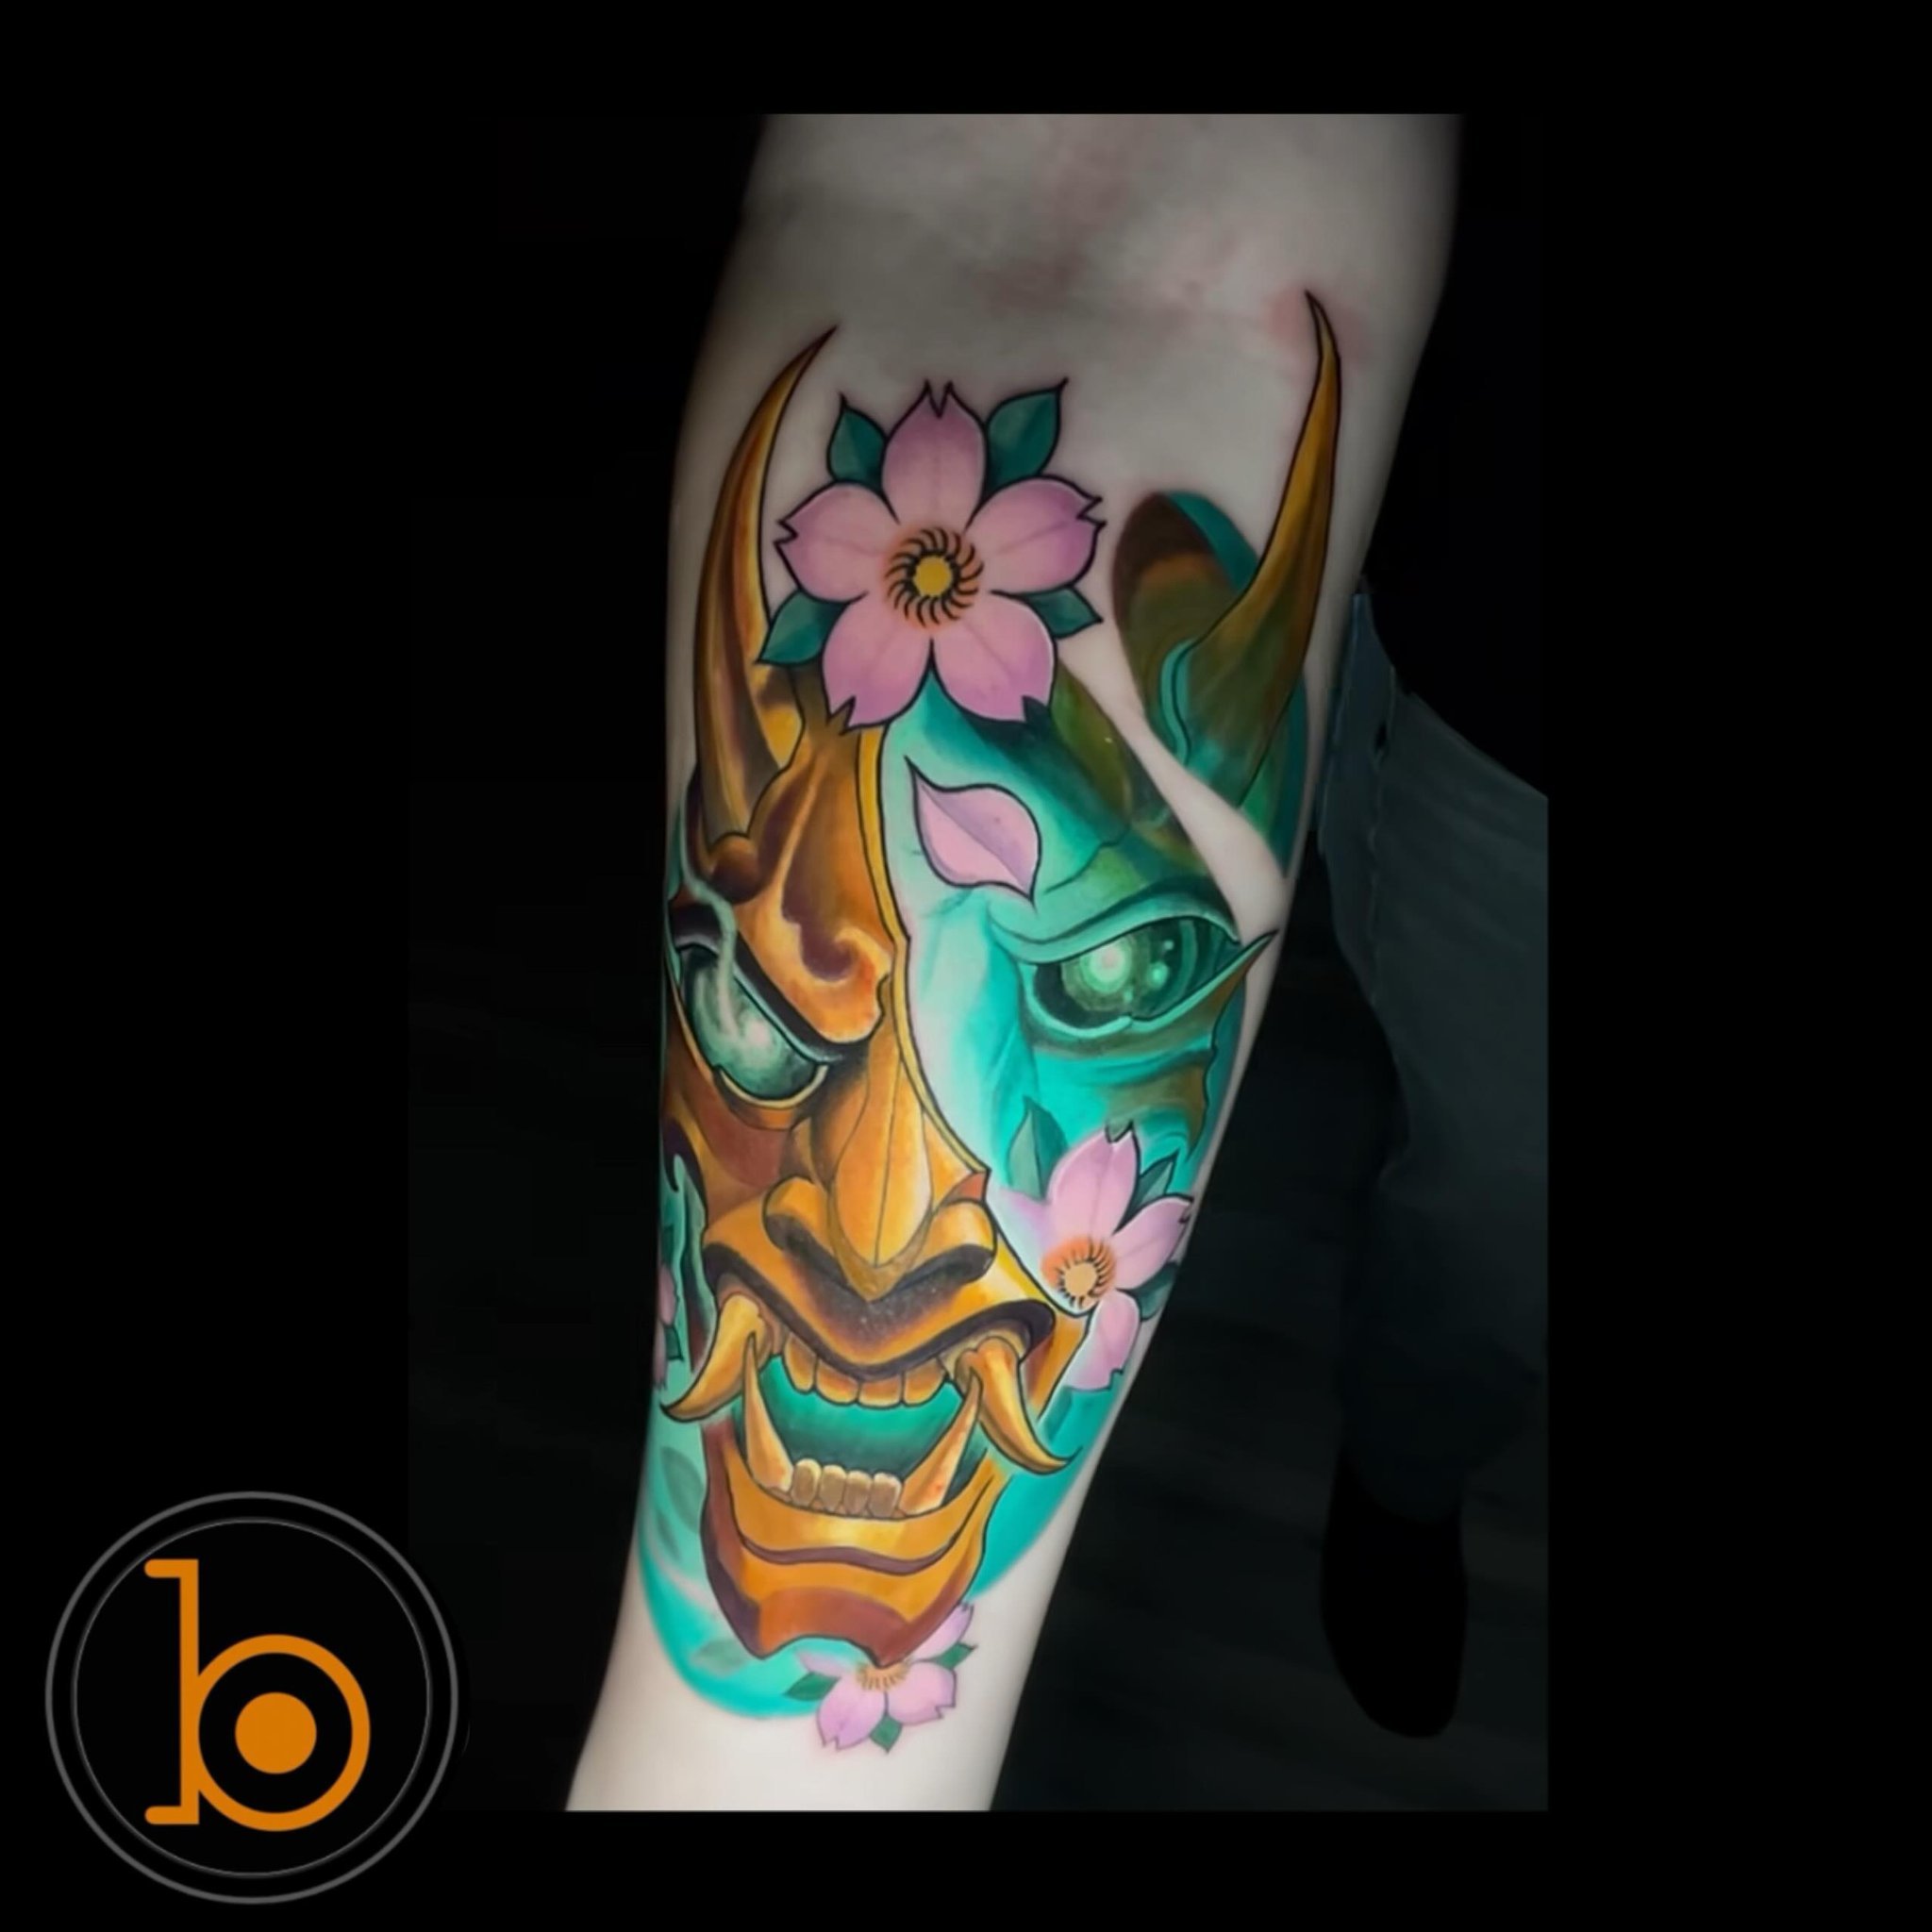 Hannya Mask by resident artist @oldmanfisk 👺🌸🌟
➖➖➖➖➖➖➖➖➖➖➖➖➖➖➖➖➖
Blueprint Gallery
138 Russell St
 Hadley MA 01035
📱(413)-387-0221 
WALK-INS WELCOME 
🕸️ www.blueprintgallery.com 🕸️
⬇️⬇️⬇️⬇️⬇️⬇️⬇️⬇️⬇️⬇️⬇️⬇️⬇️
Made using materials from:
🌈 @indus